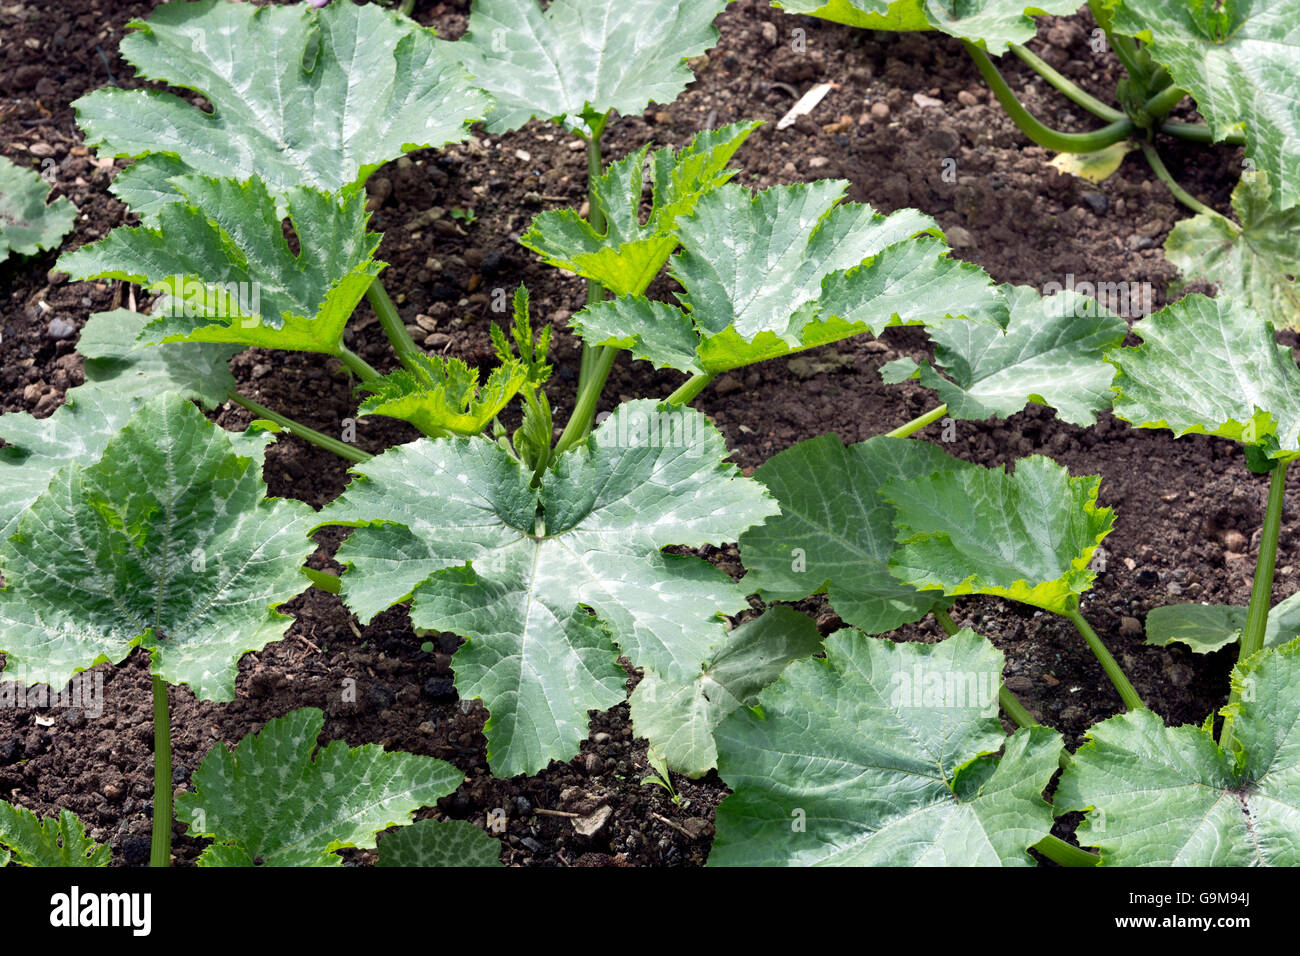 Courgette plants growing in a garden Stock Photo